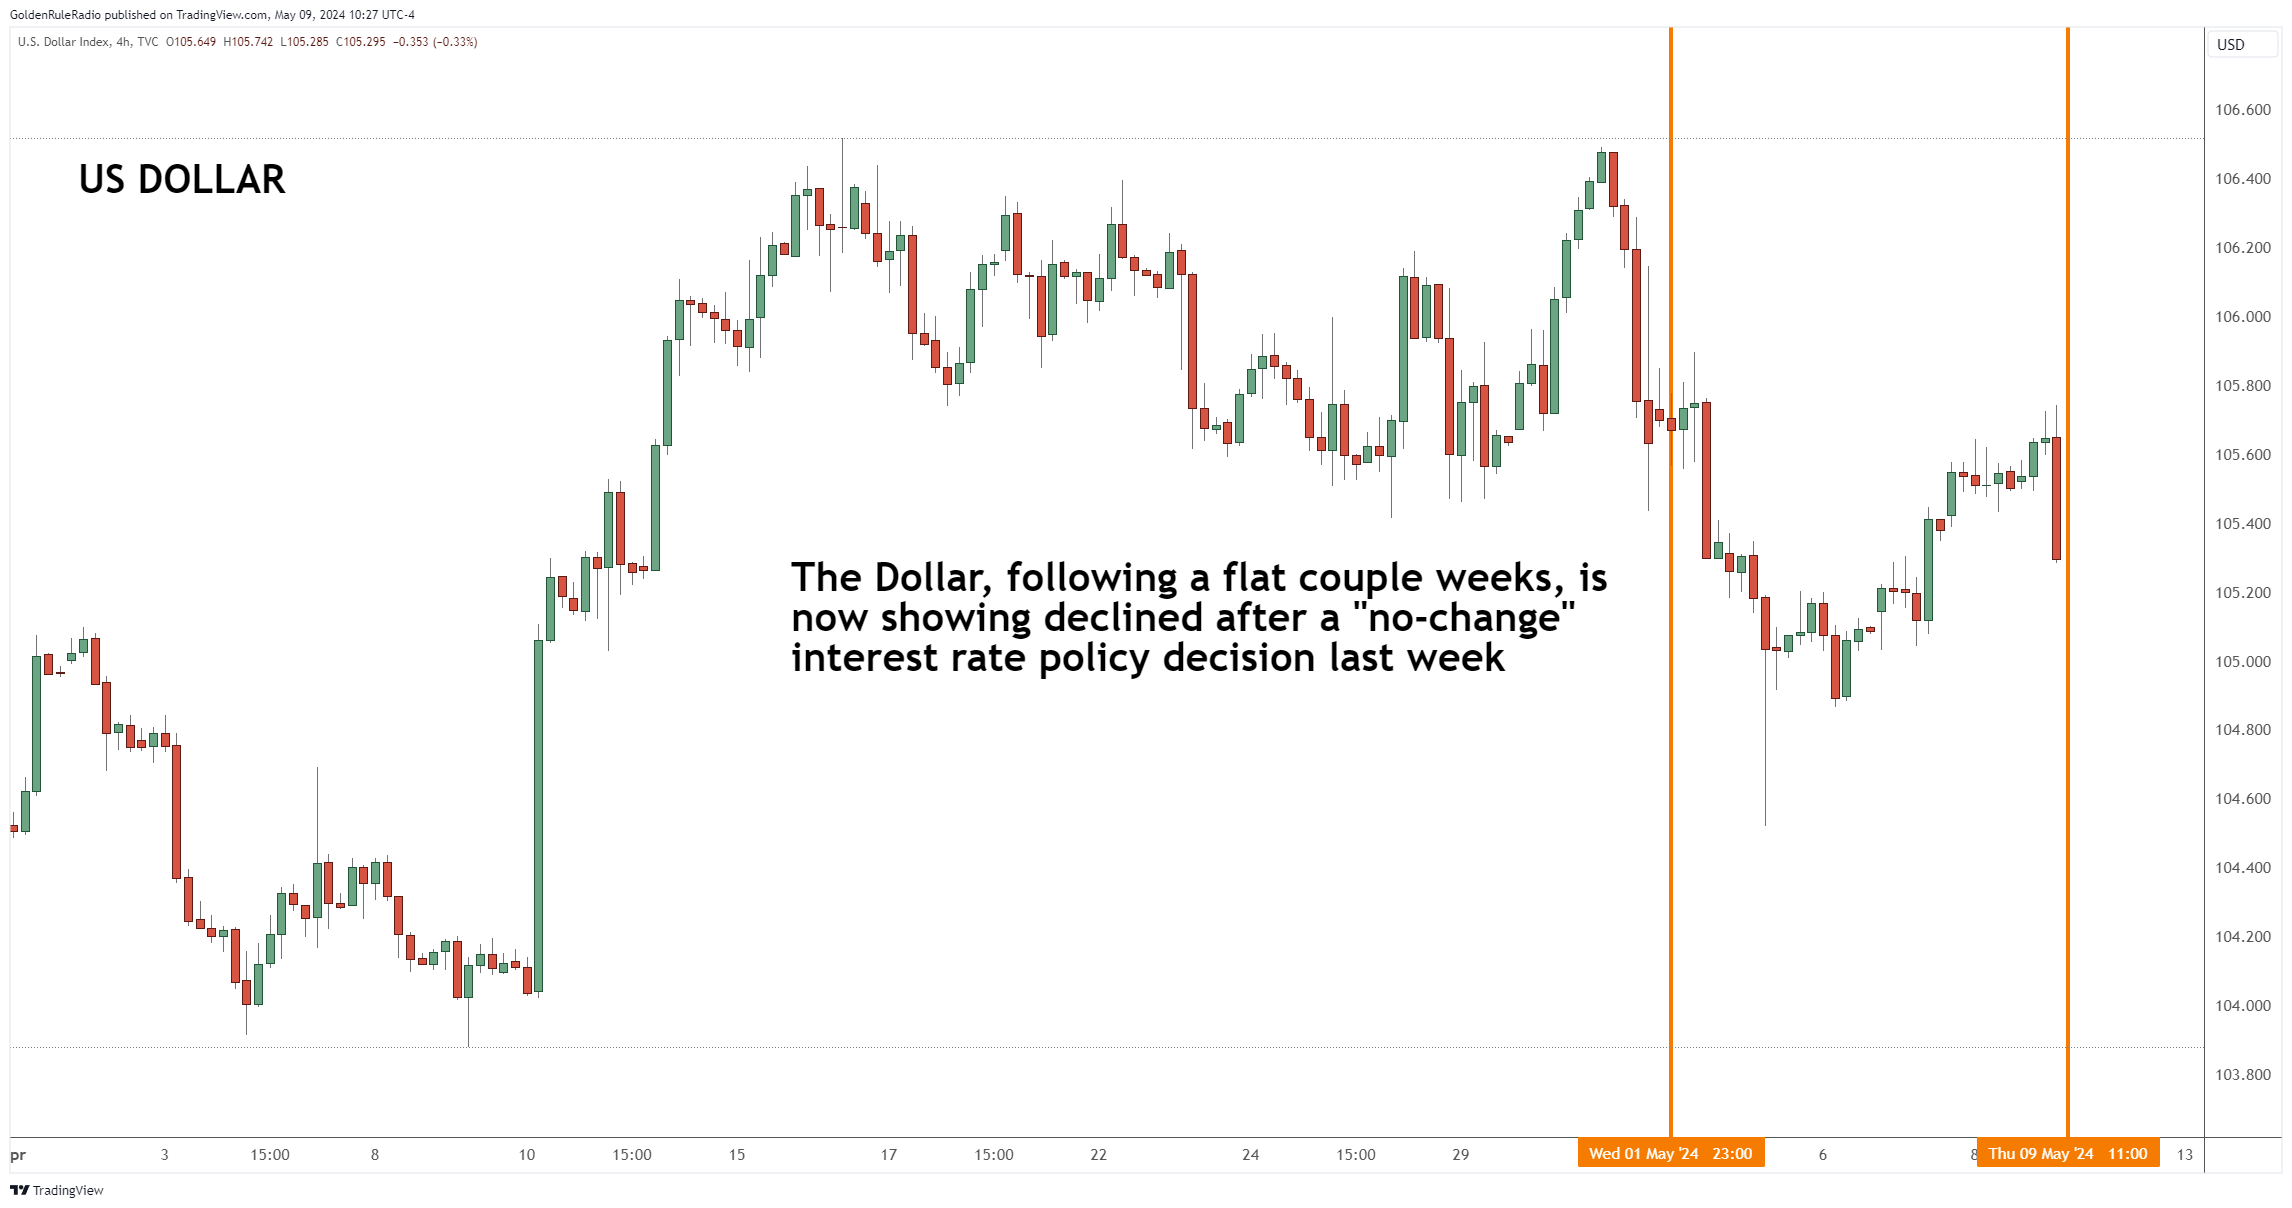 Chart showing the current value of the dollar at around $105.5